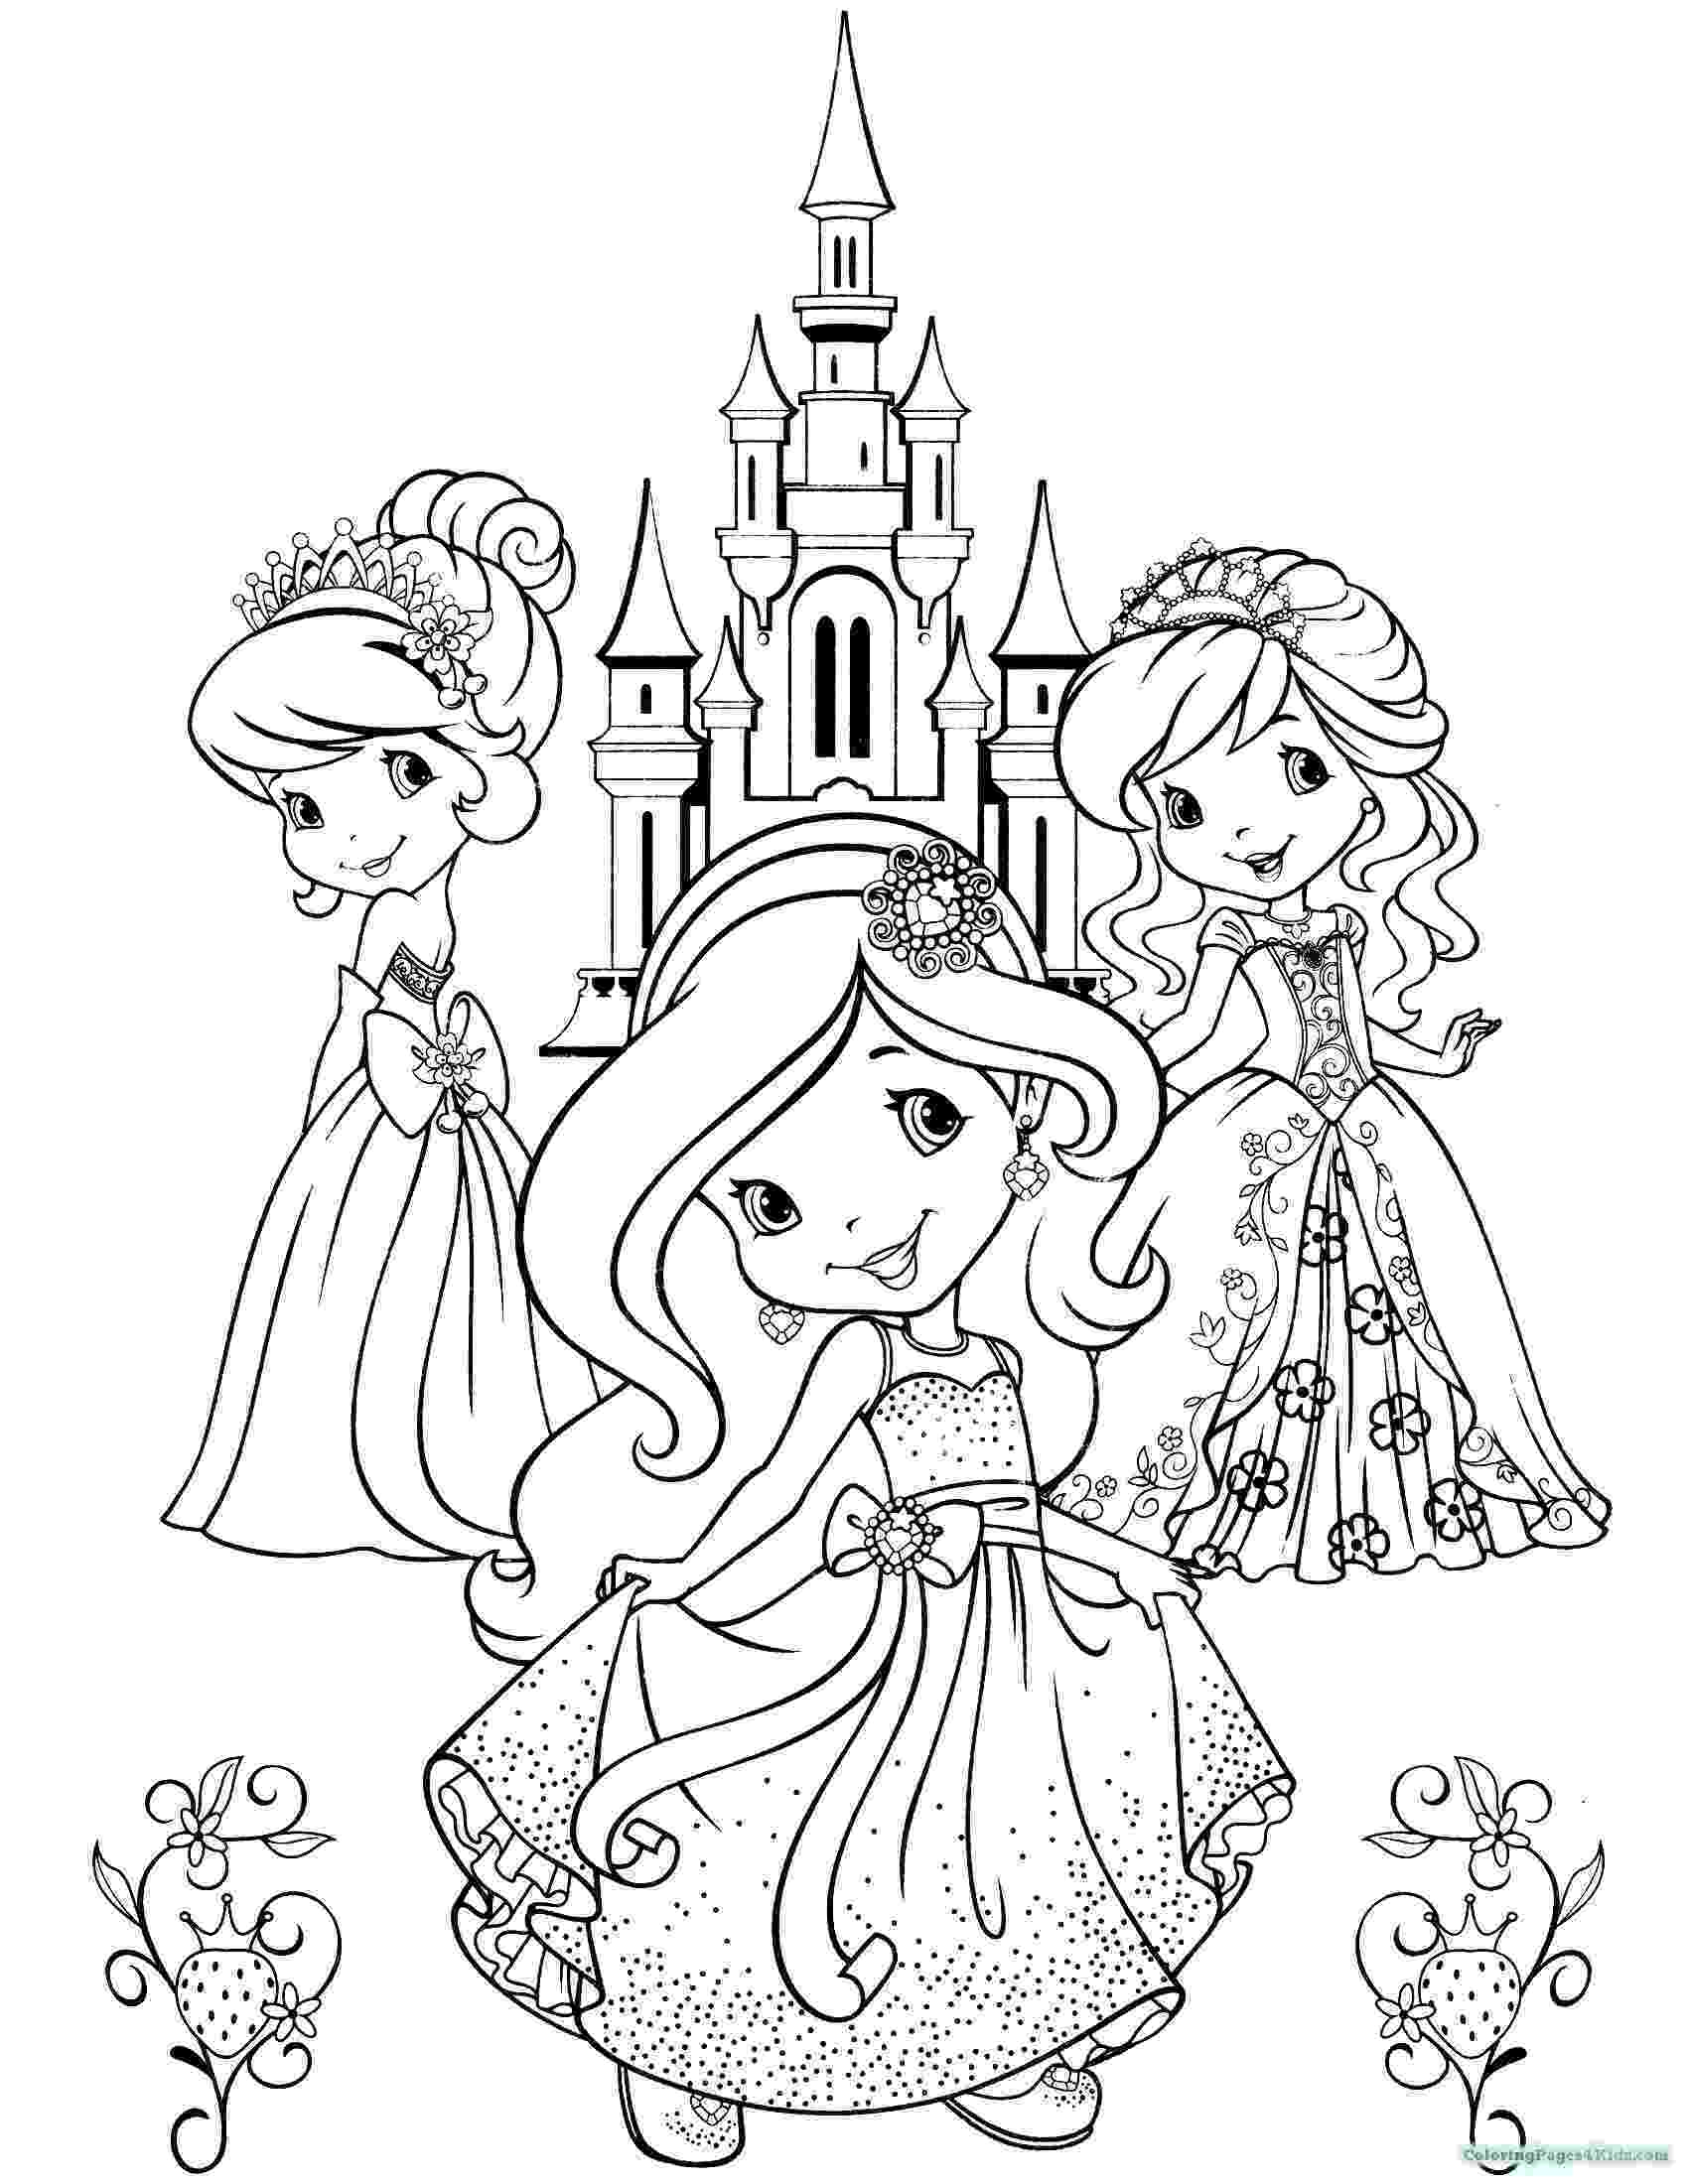 strawberry shortcake and friends coloring pages 55 coloring pages of strawberry shortcake and friends shortcake coloring friends pages and strawberry 